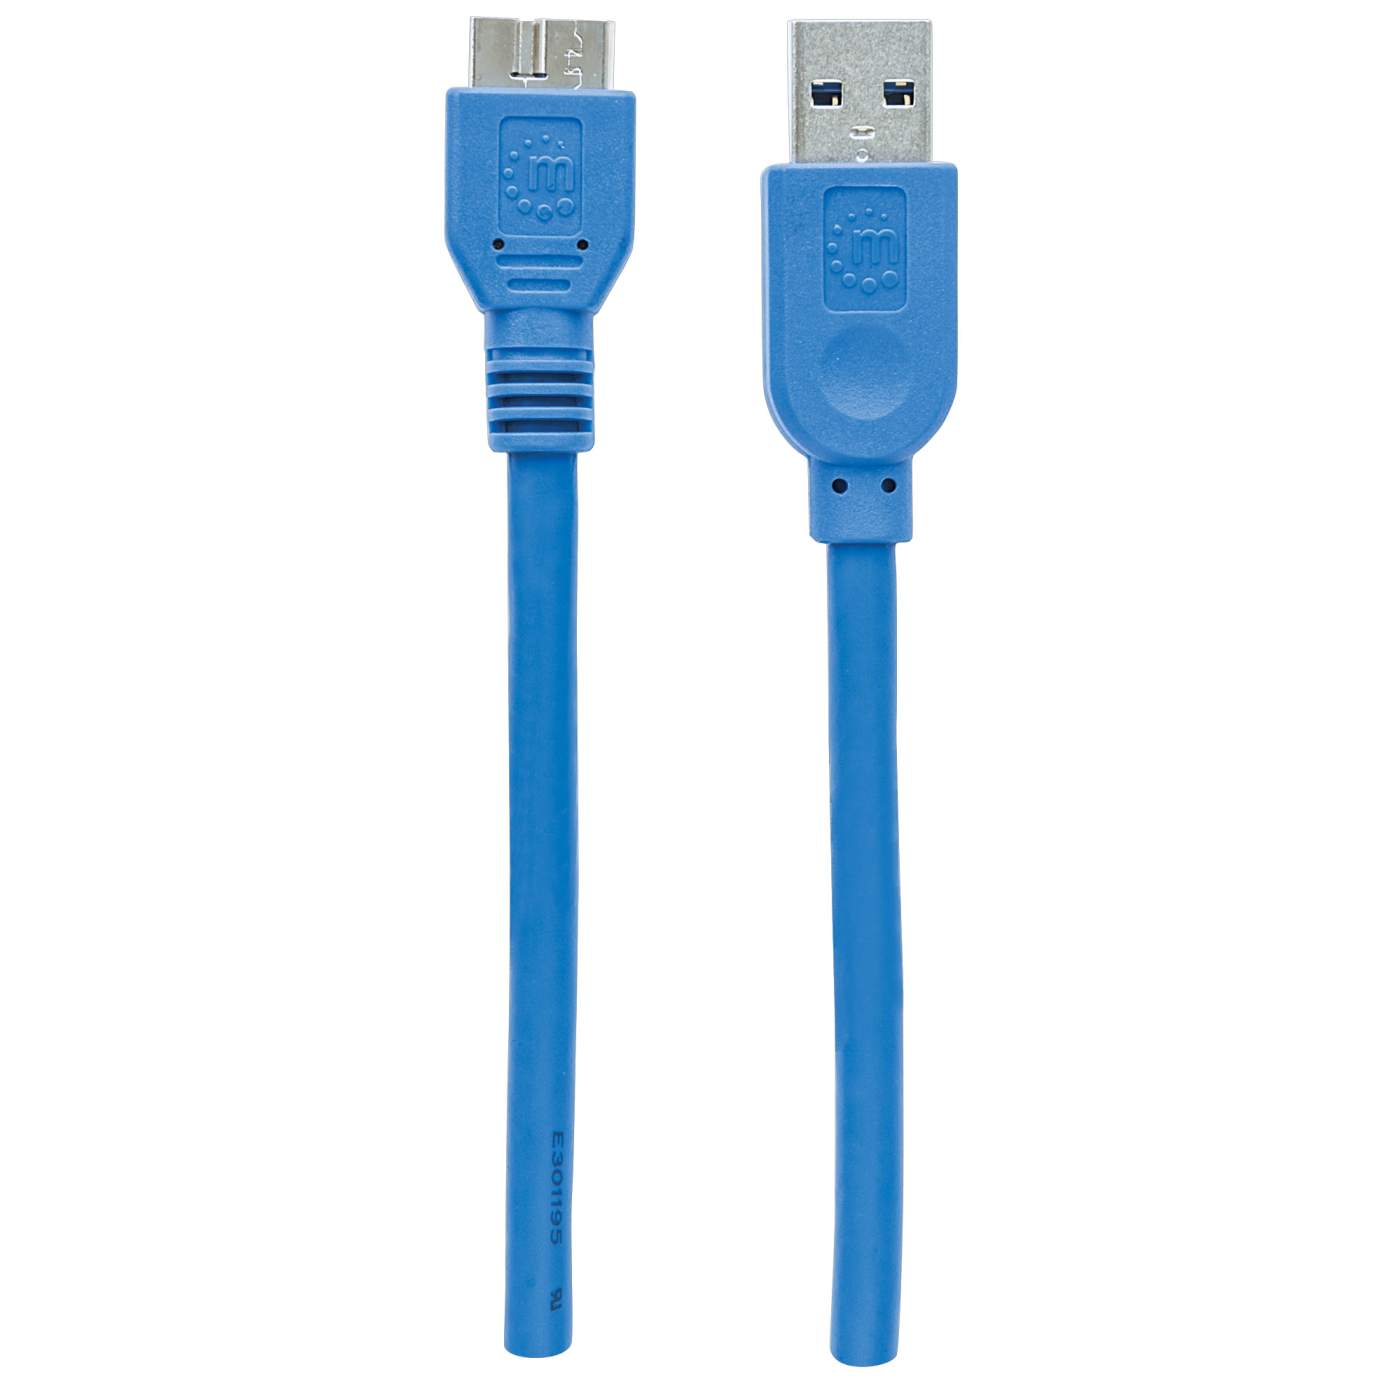 USB 3.0 Type-A to Micro-USB Cable Image 5